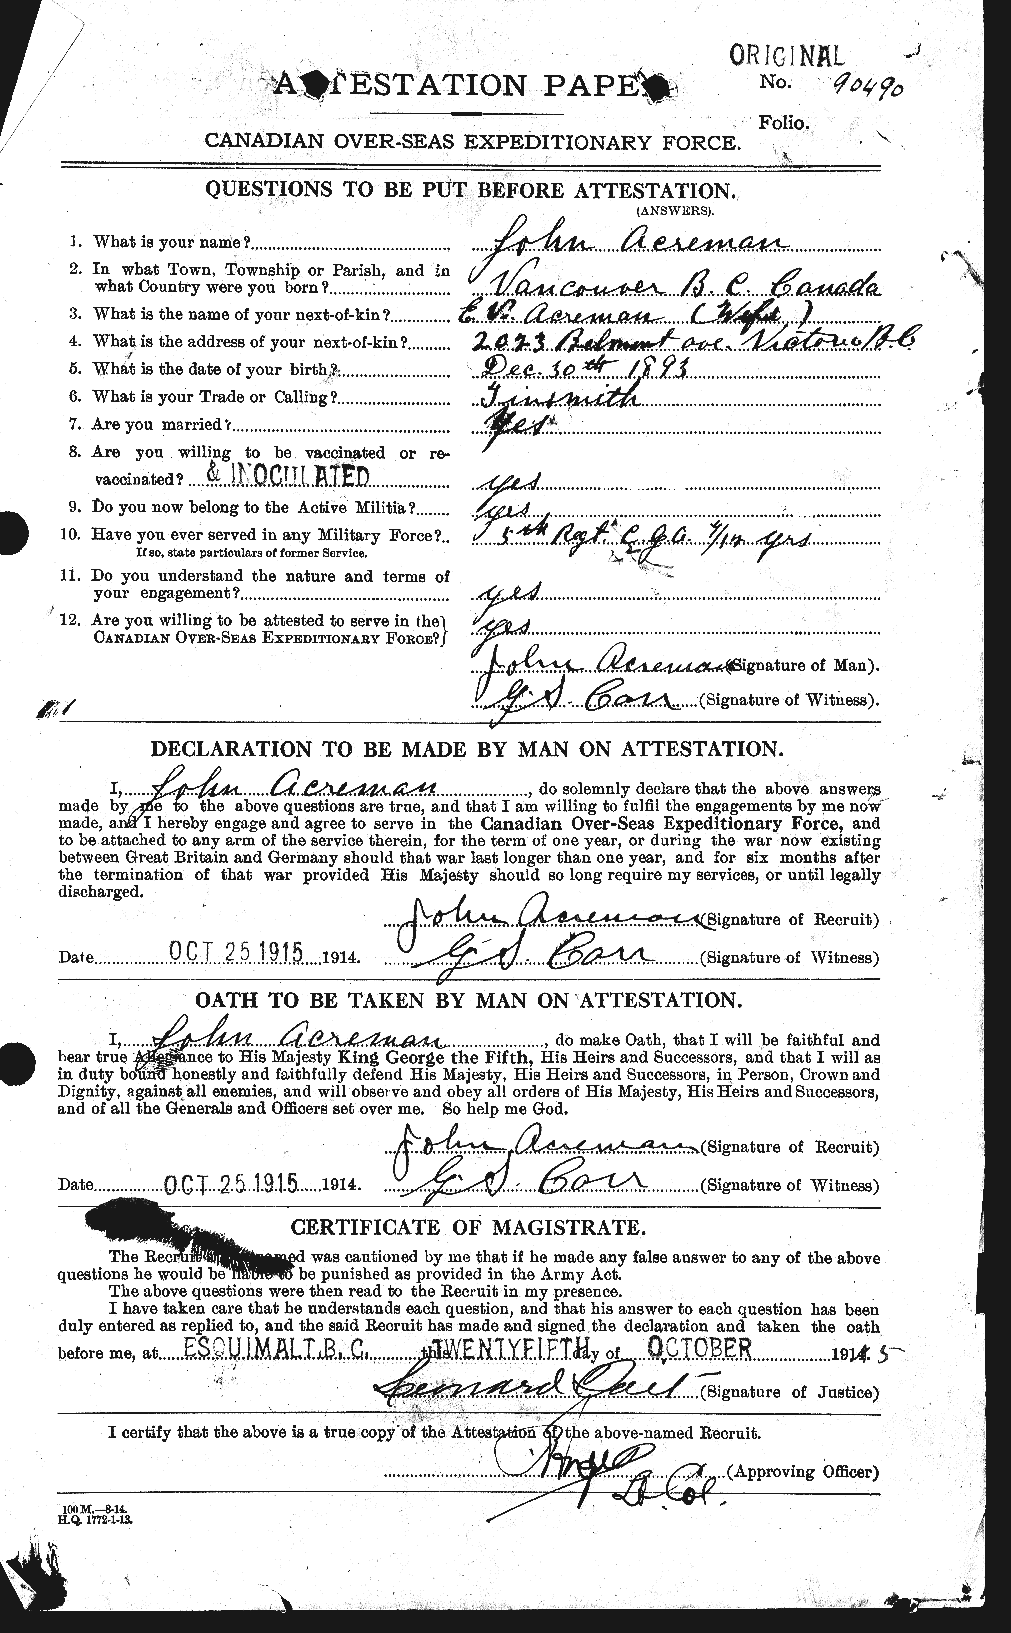 Personnel Records of the First World War - CEF 200875a